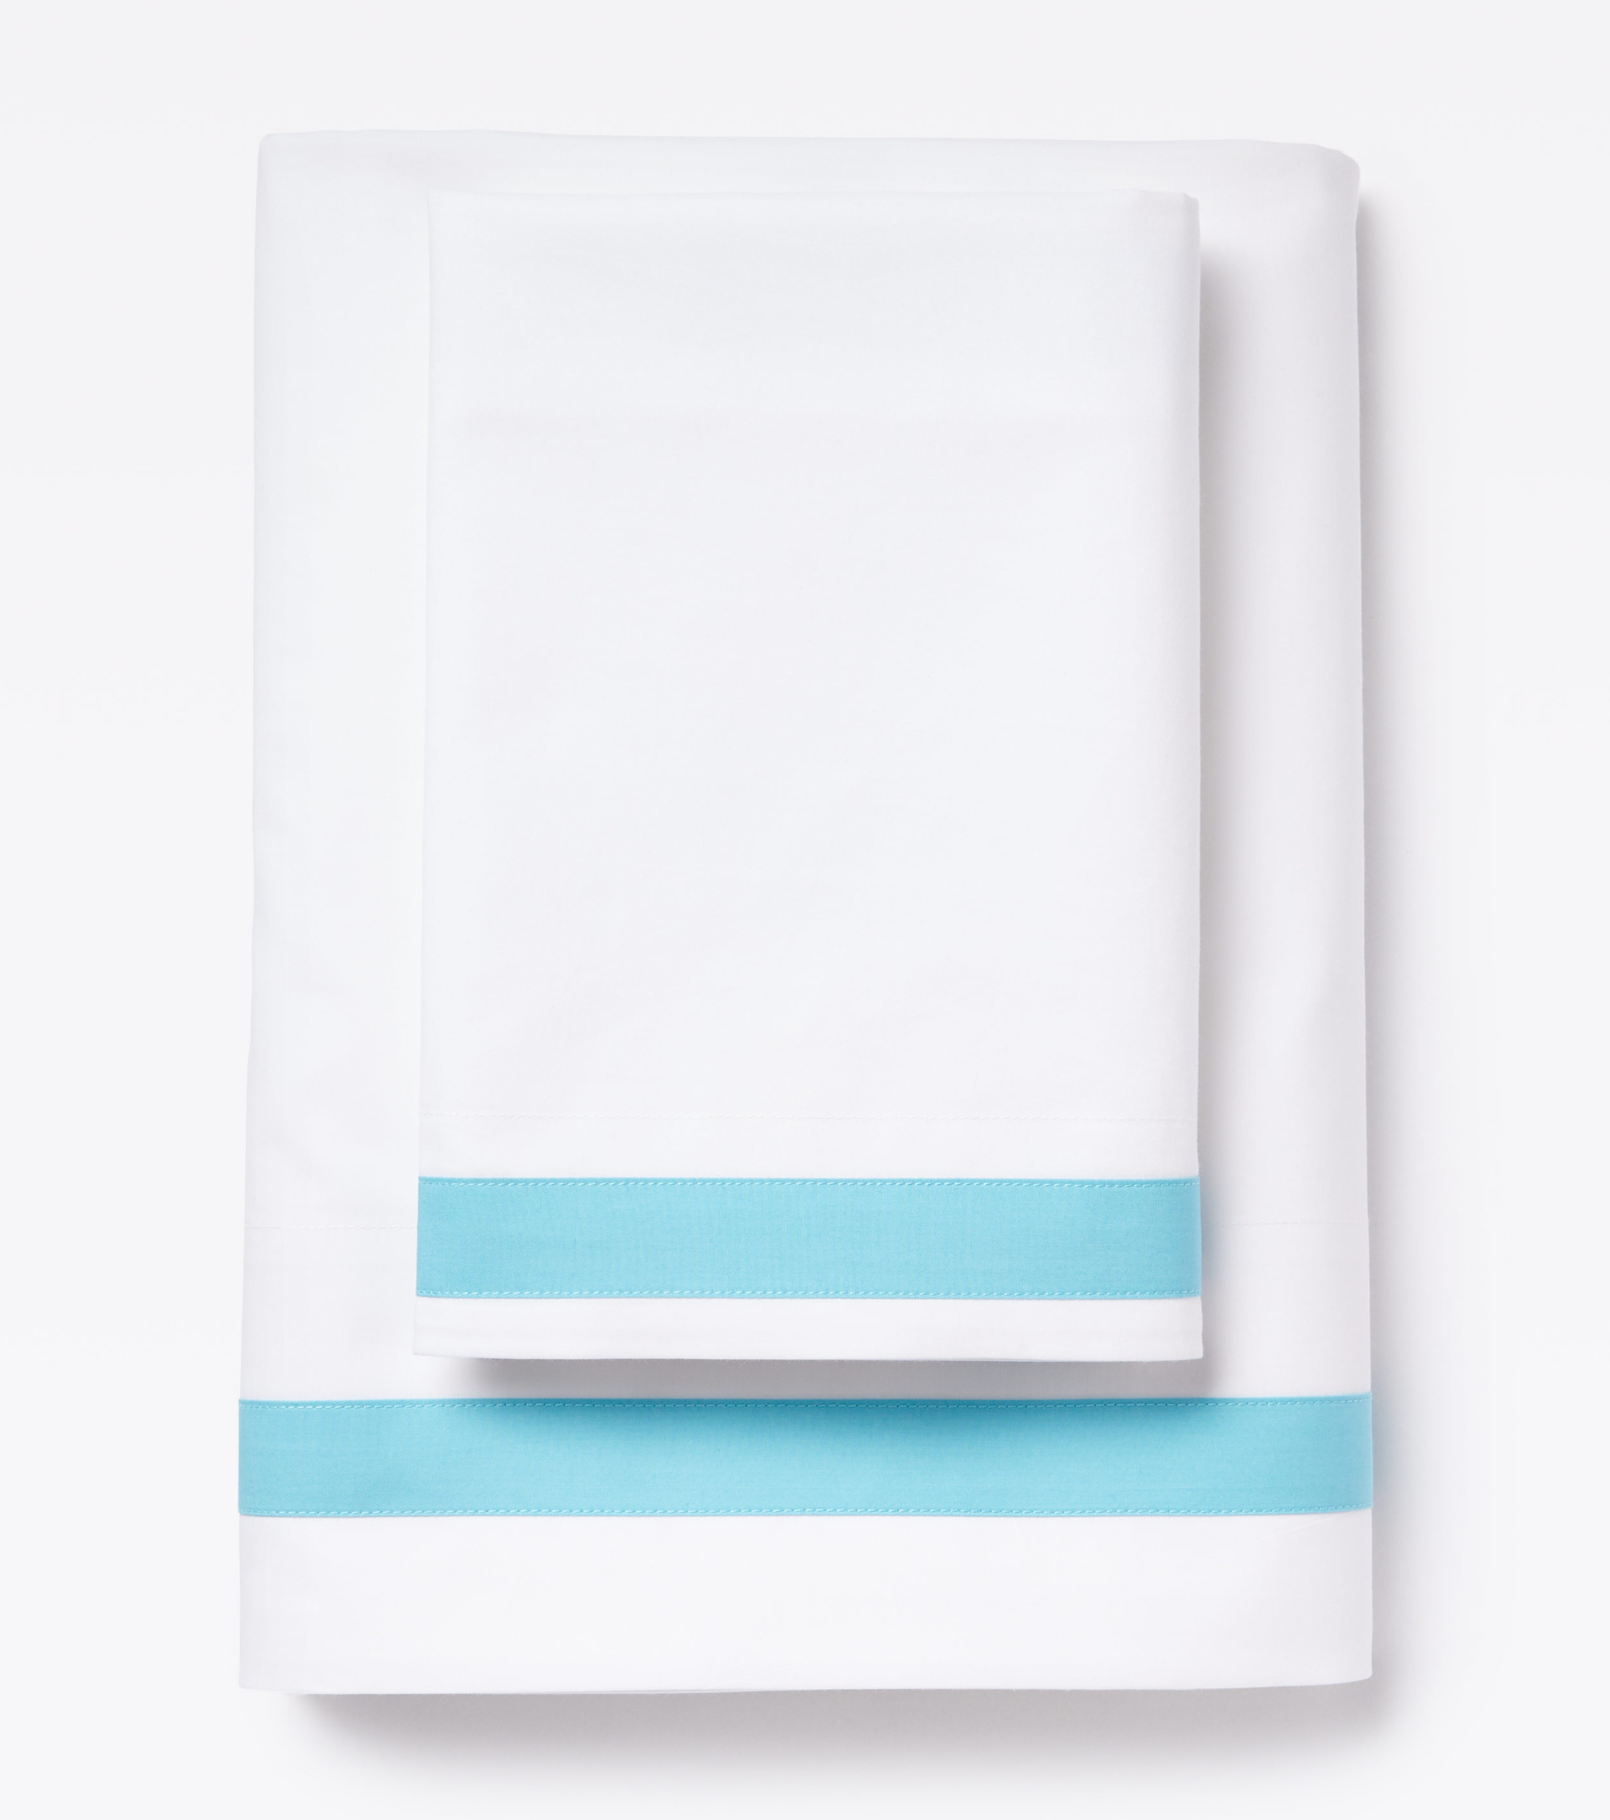 Averylily Border Frame Sheet Set in Sky Blue. 510-thread count pure cotton percale.